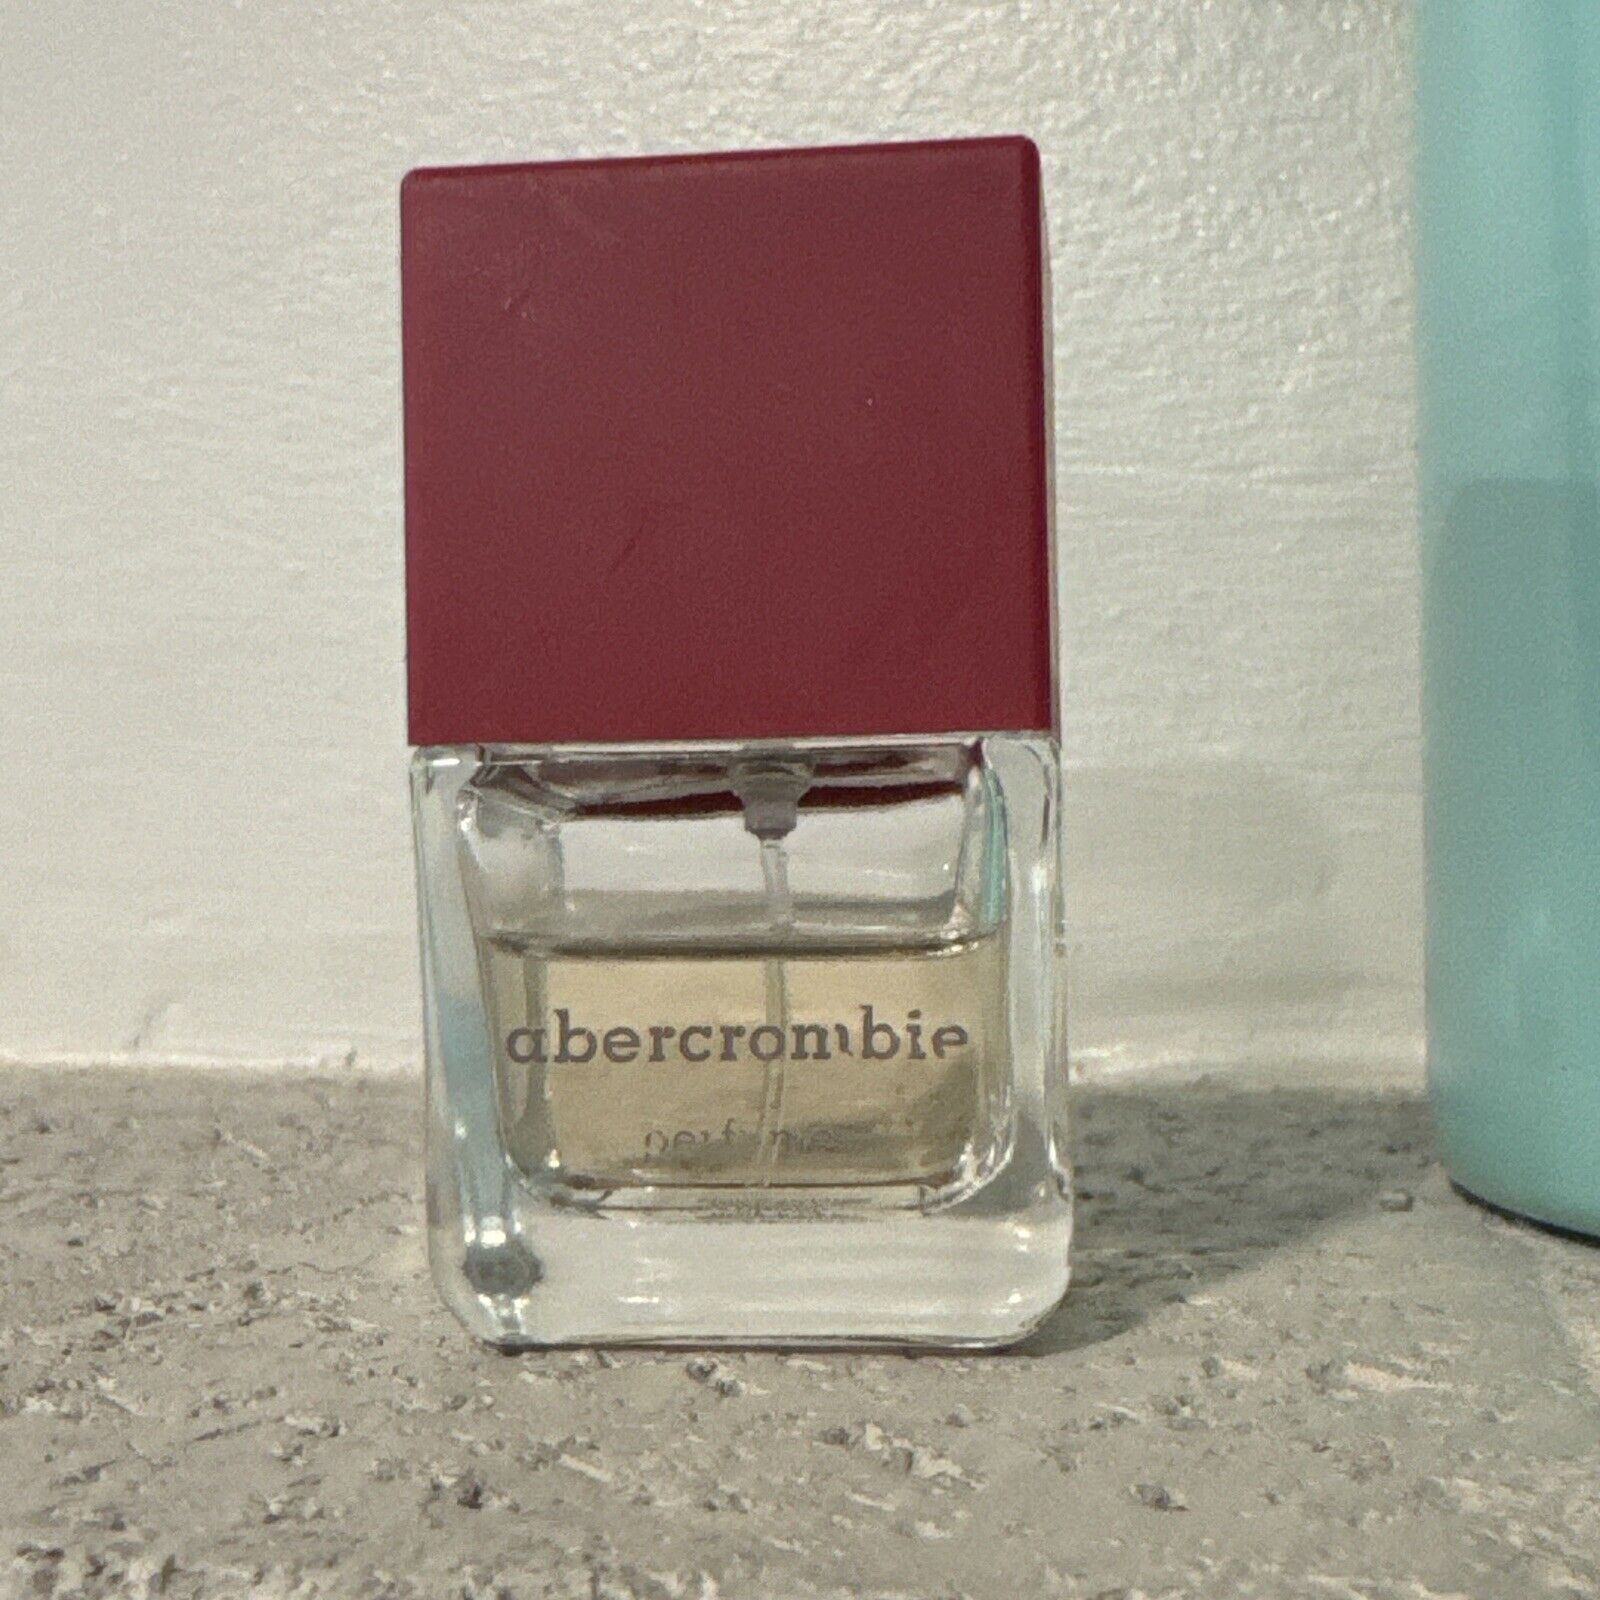 RARE- Vintage Abercrombie Perfume - from early 2000s - Girls Women’s 1 Oz - READ